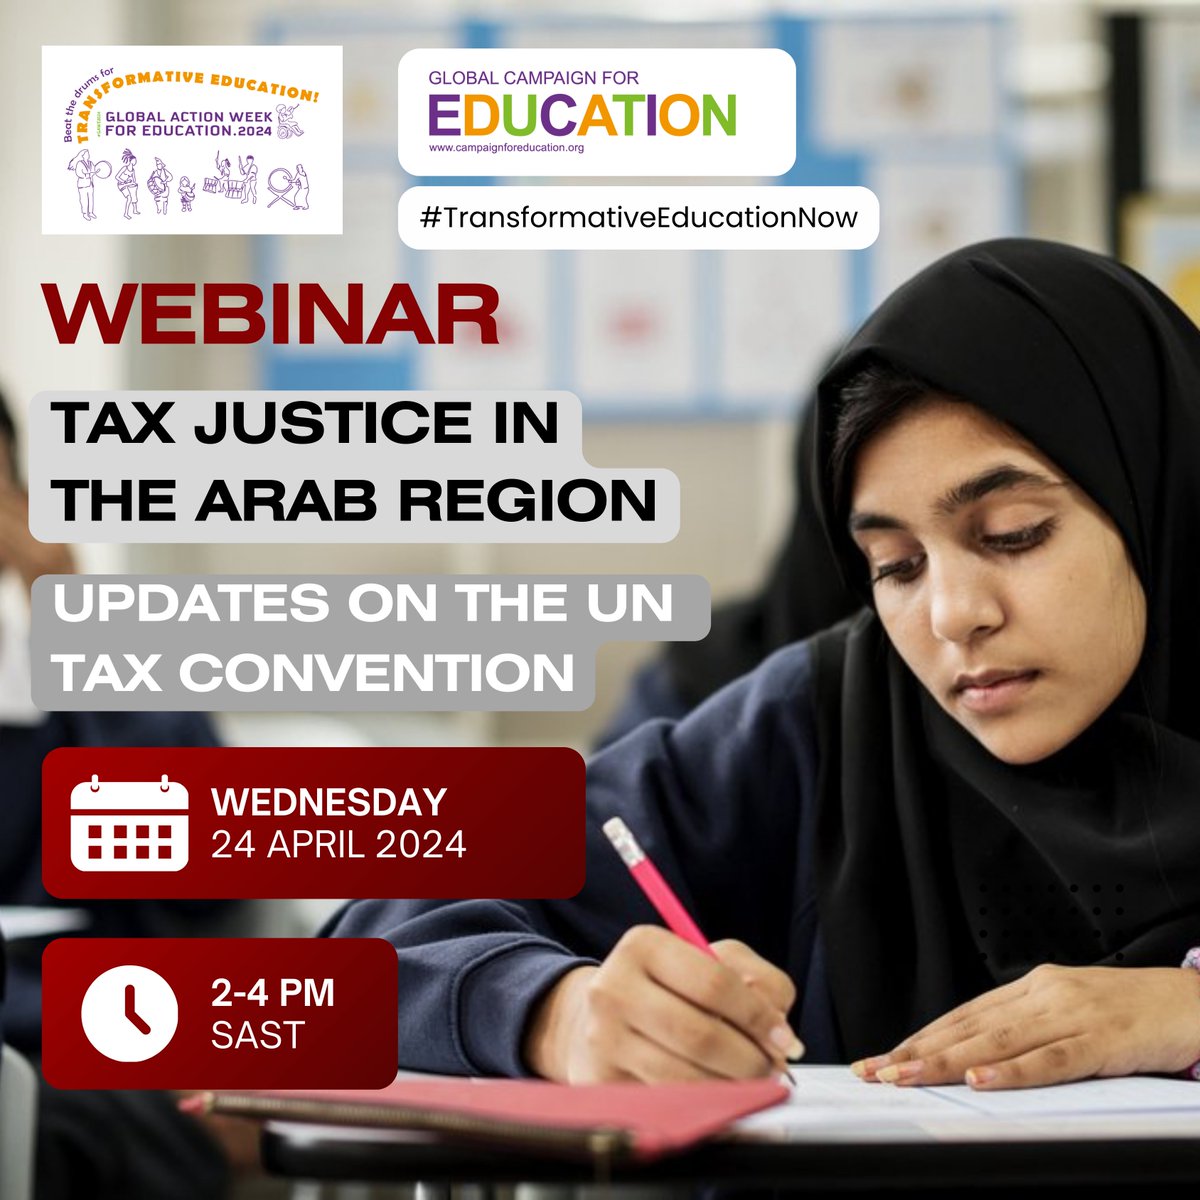 Webinar Launch of GAWE 2024 on April 22, 2:00-4:00 PM South Africa Register us02web.zoom.us/webinar/regist… Webinar on Tax Justice in the Arab Region and Updates on the UN Tax Convention, April 24, 2:00 PM SAST Register us02web.zoom.us/webinar/regist… Arabic, English, French, Portuguese, Spanish